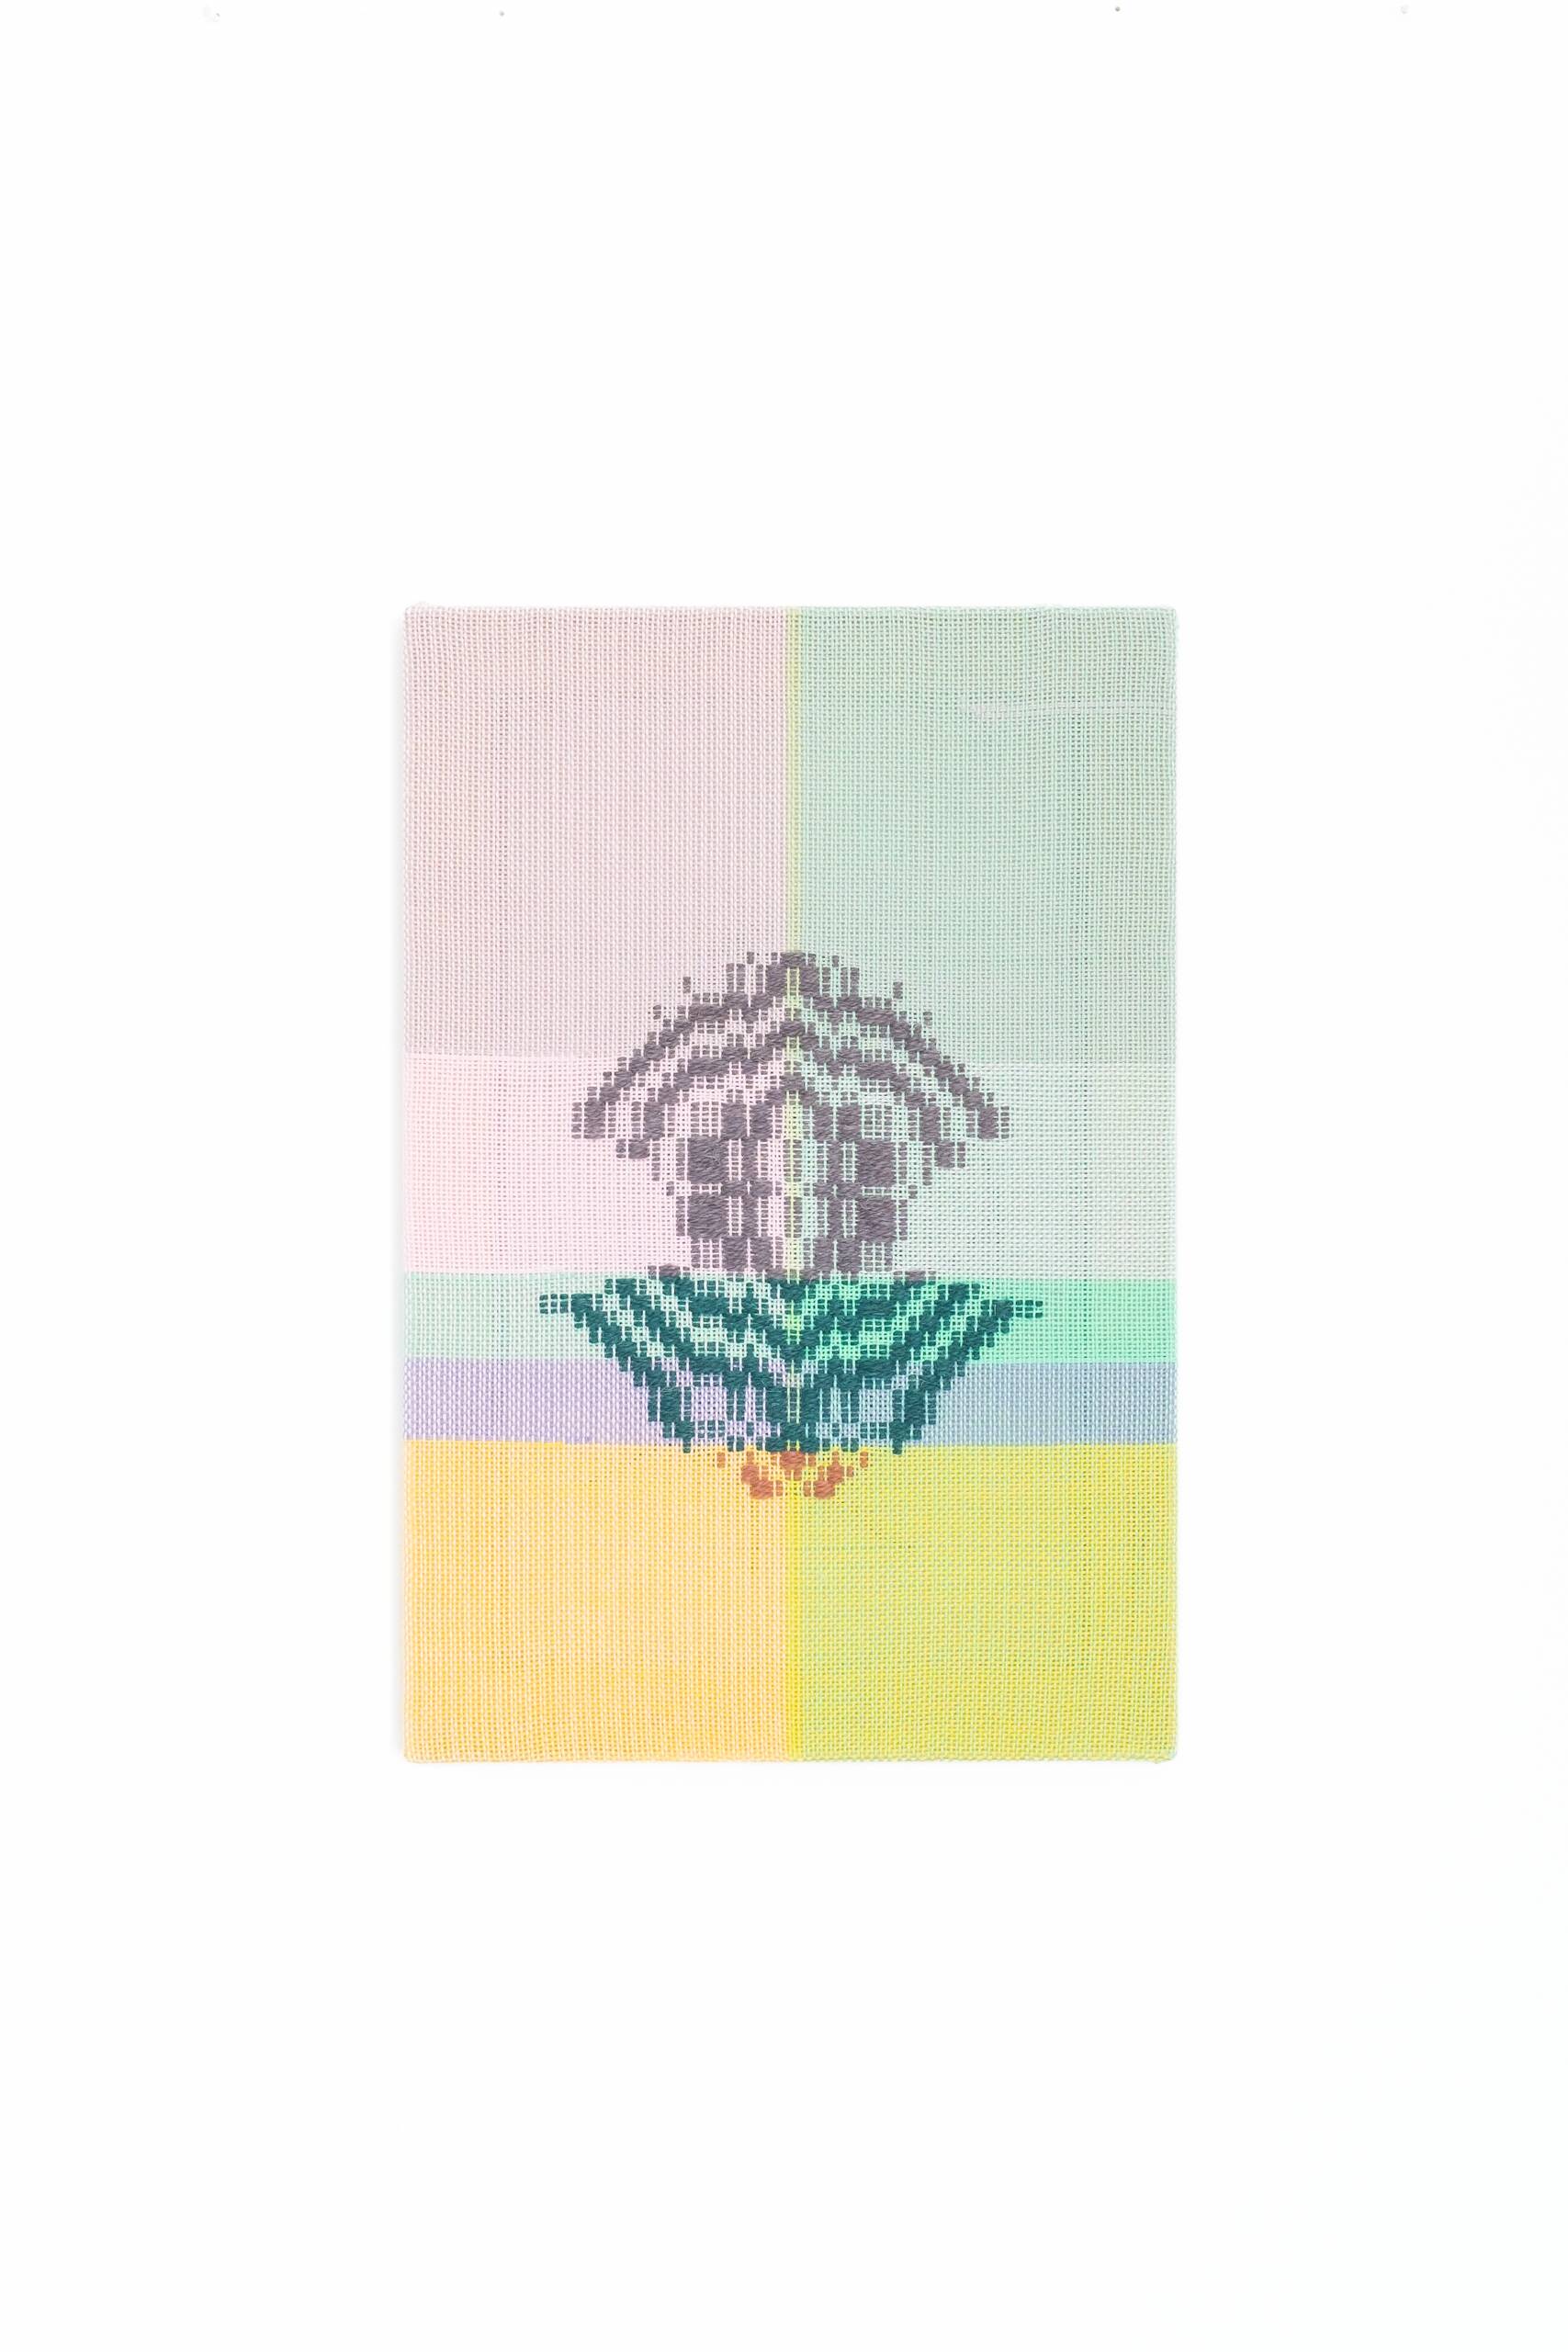 Thought-form [shield], Handwoven cotton and wool yarn, 2022